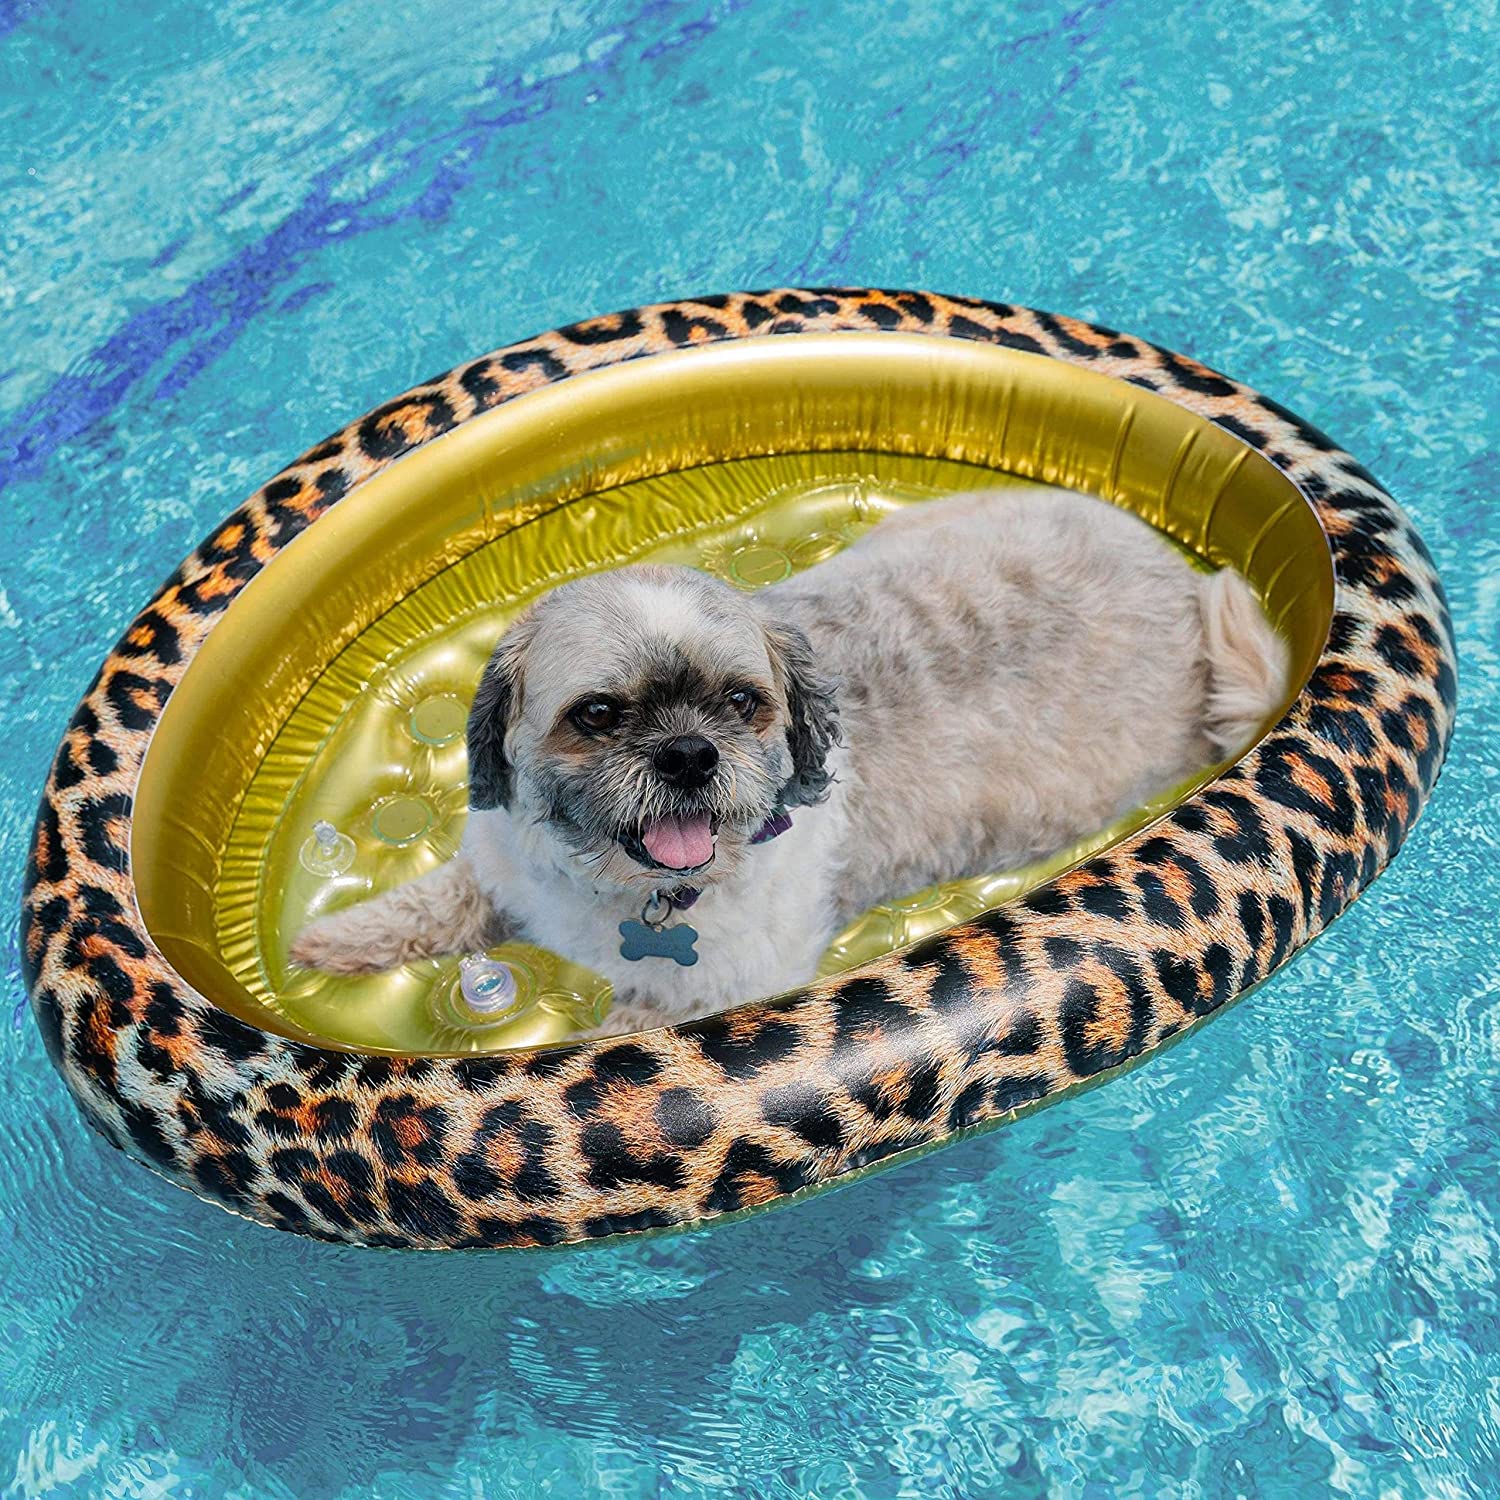 Inflatable Pet Float - Easy Set Up Doggy Pool Floats